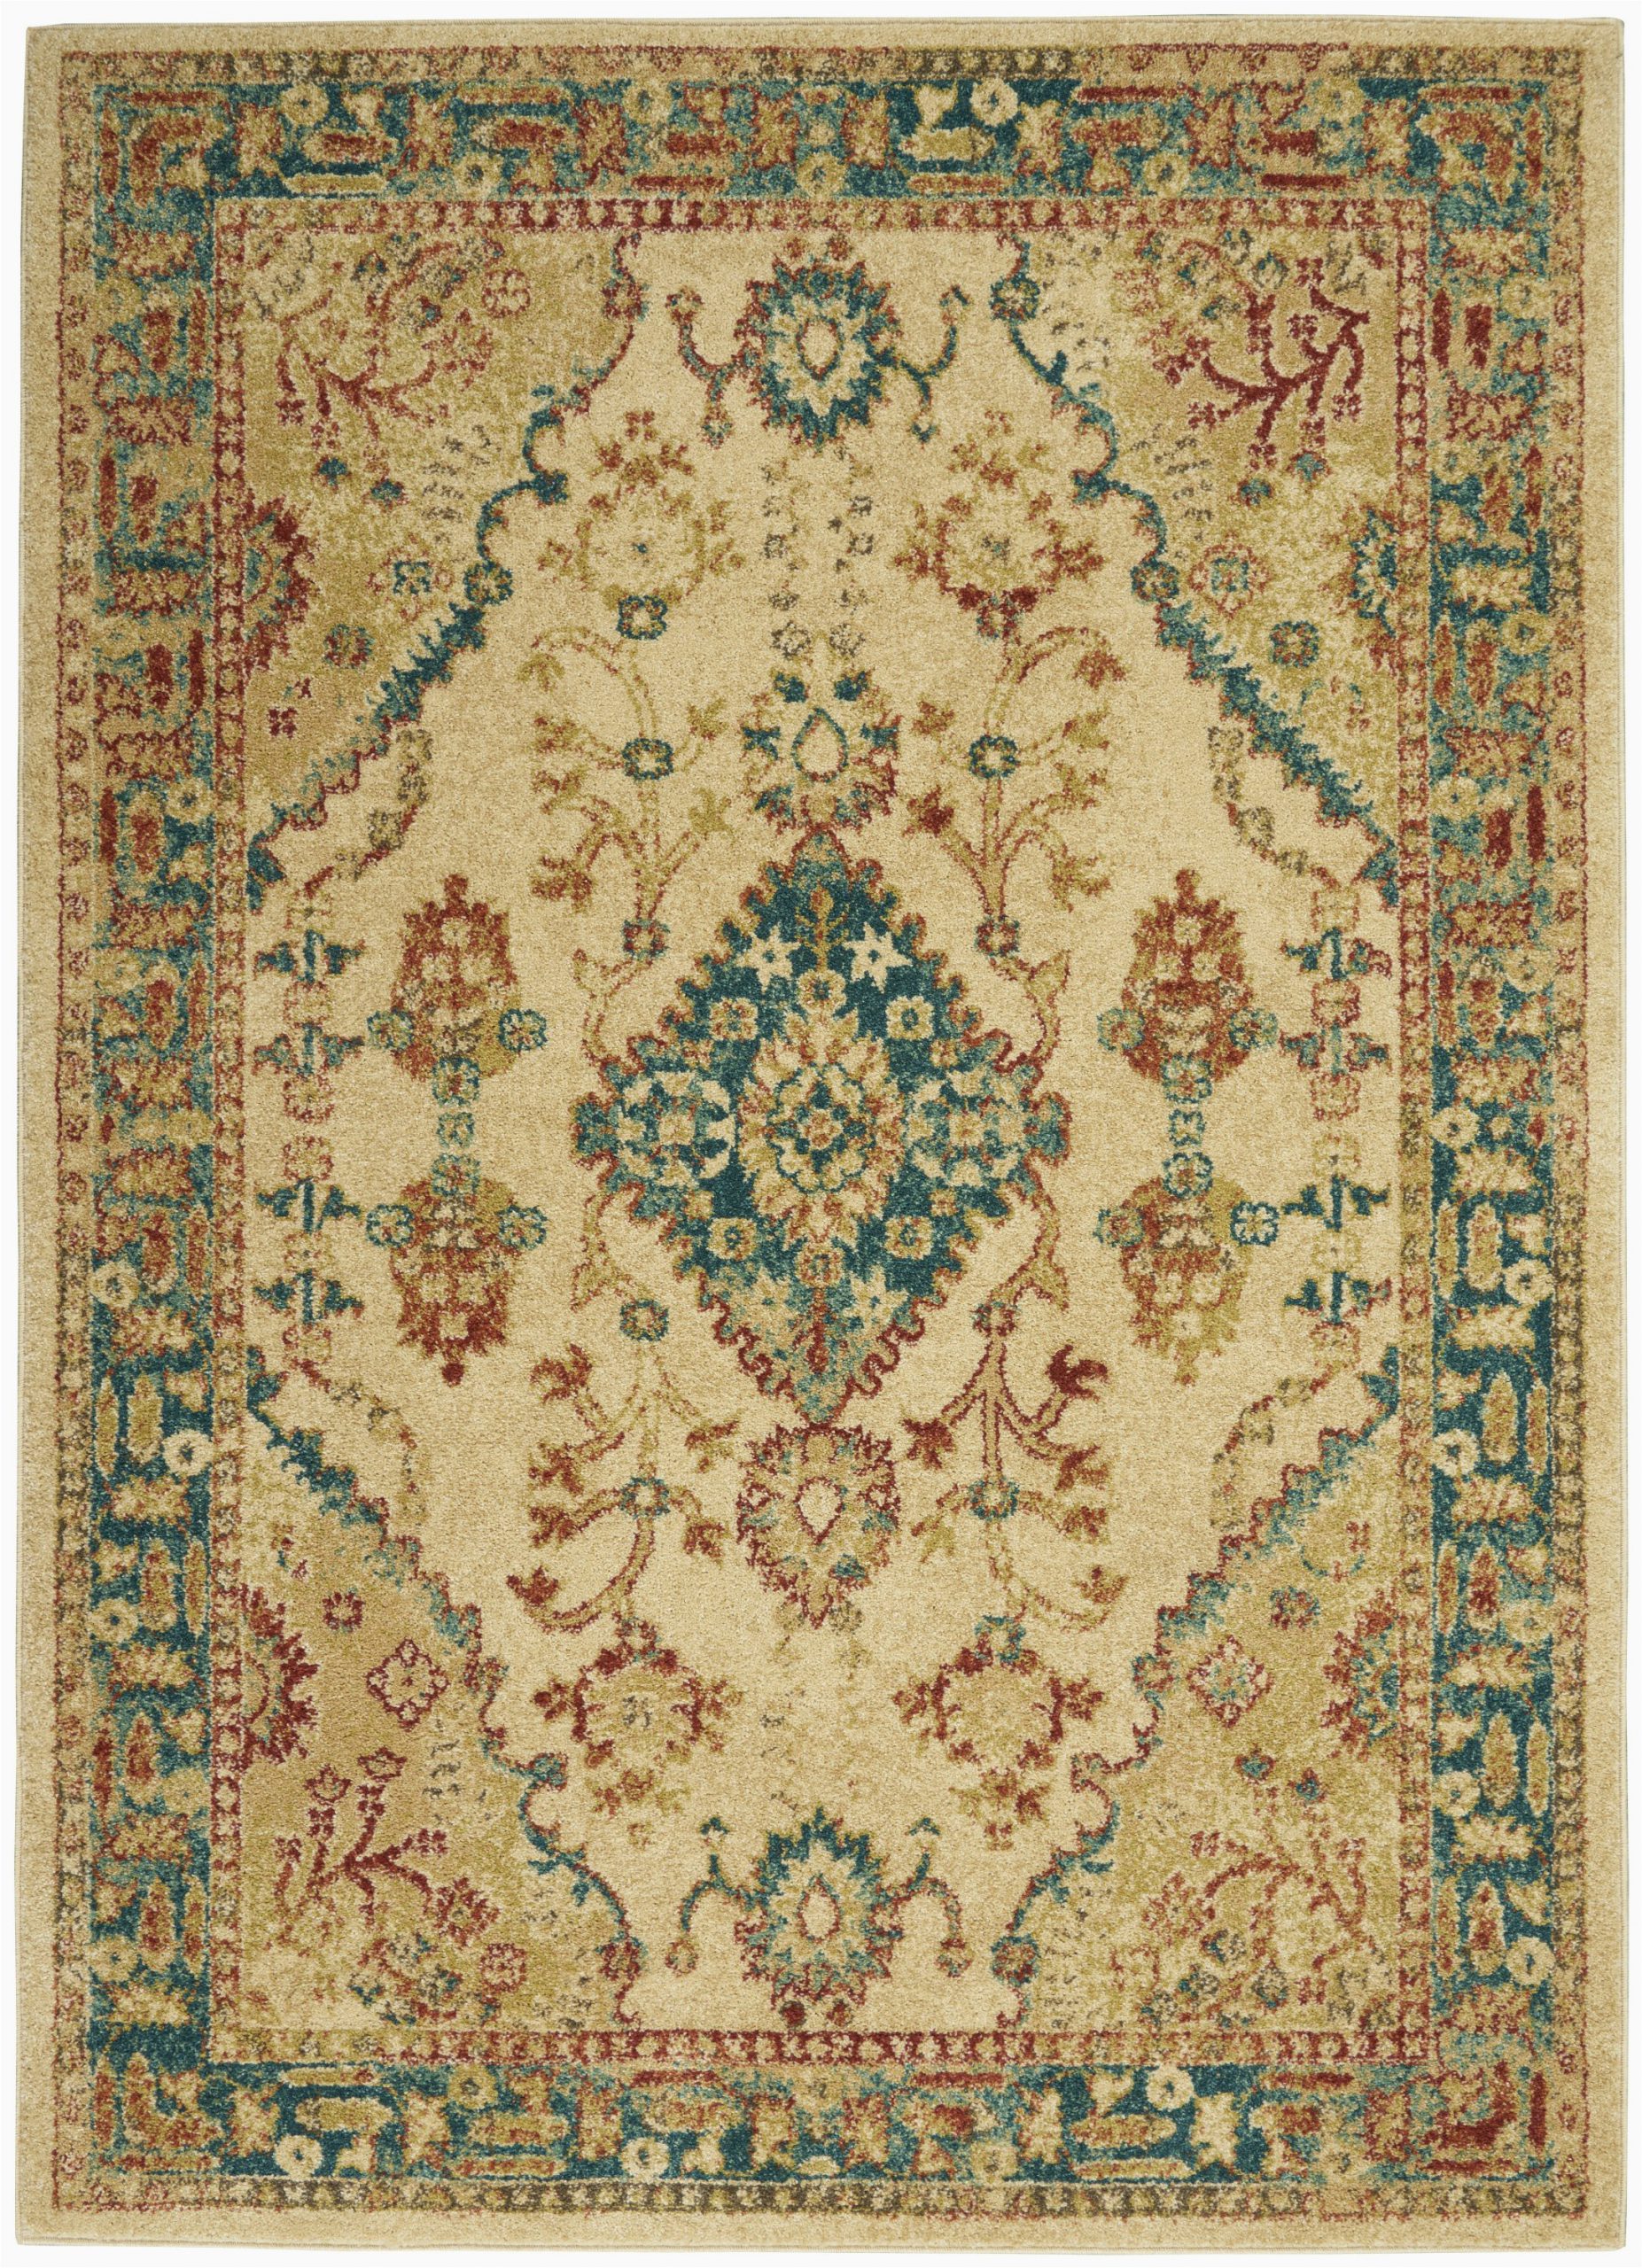 Teal and Ivory area Rugs Nourison Traditional Antique Trq04 Ivory Teal area Rug